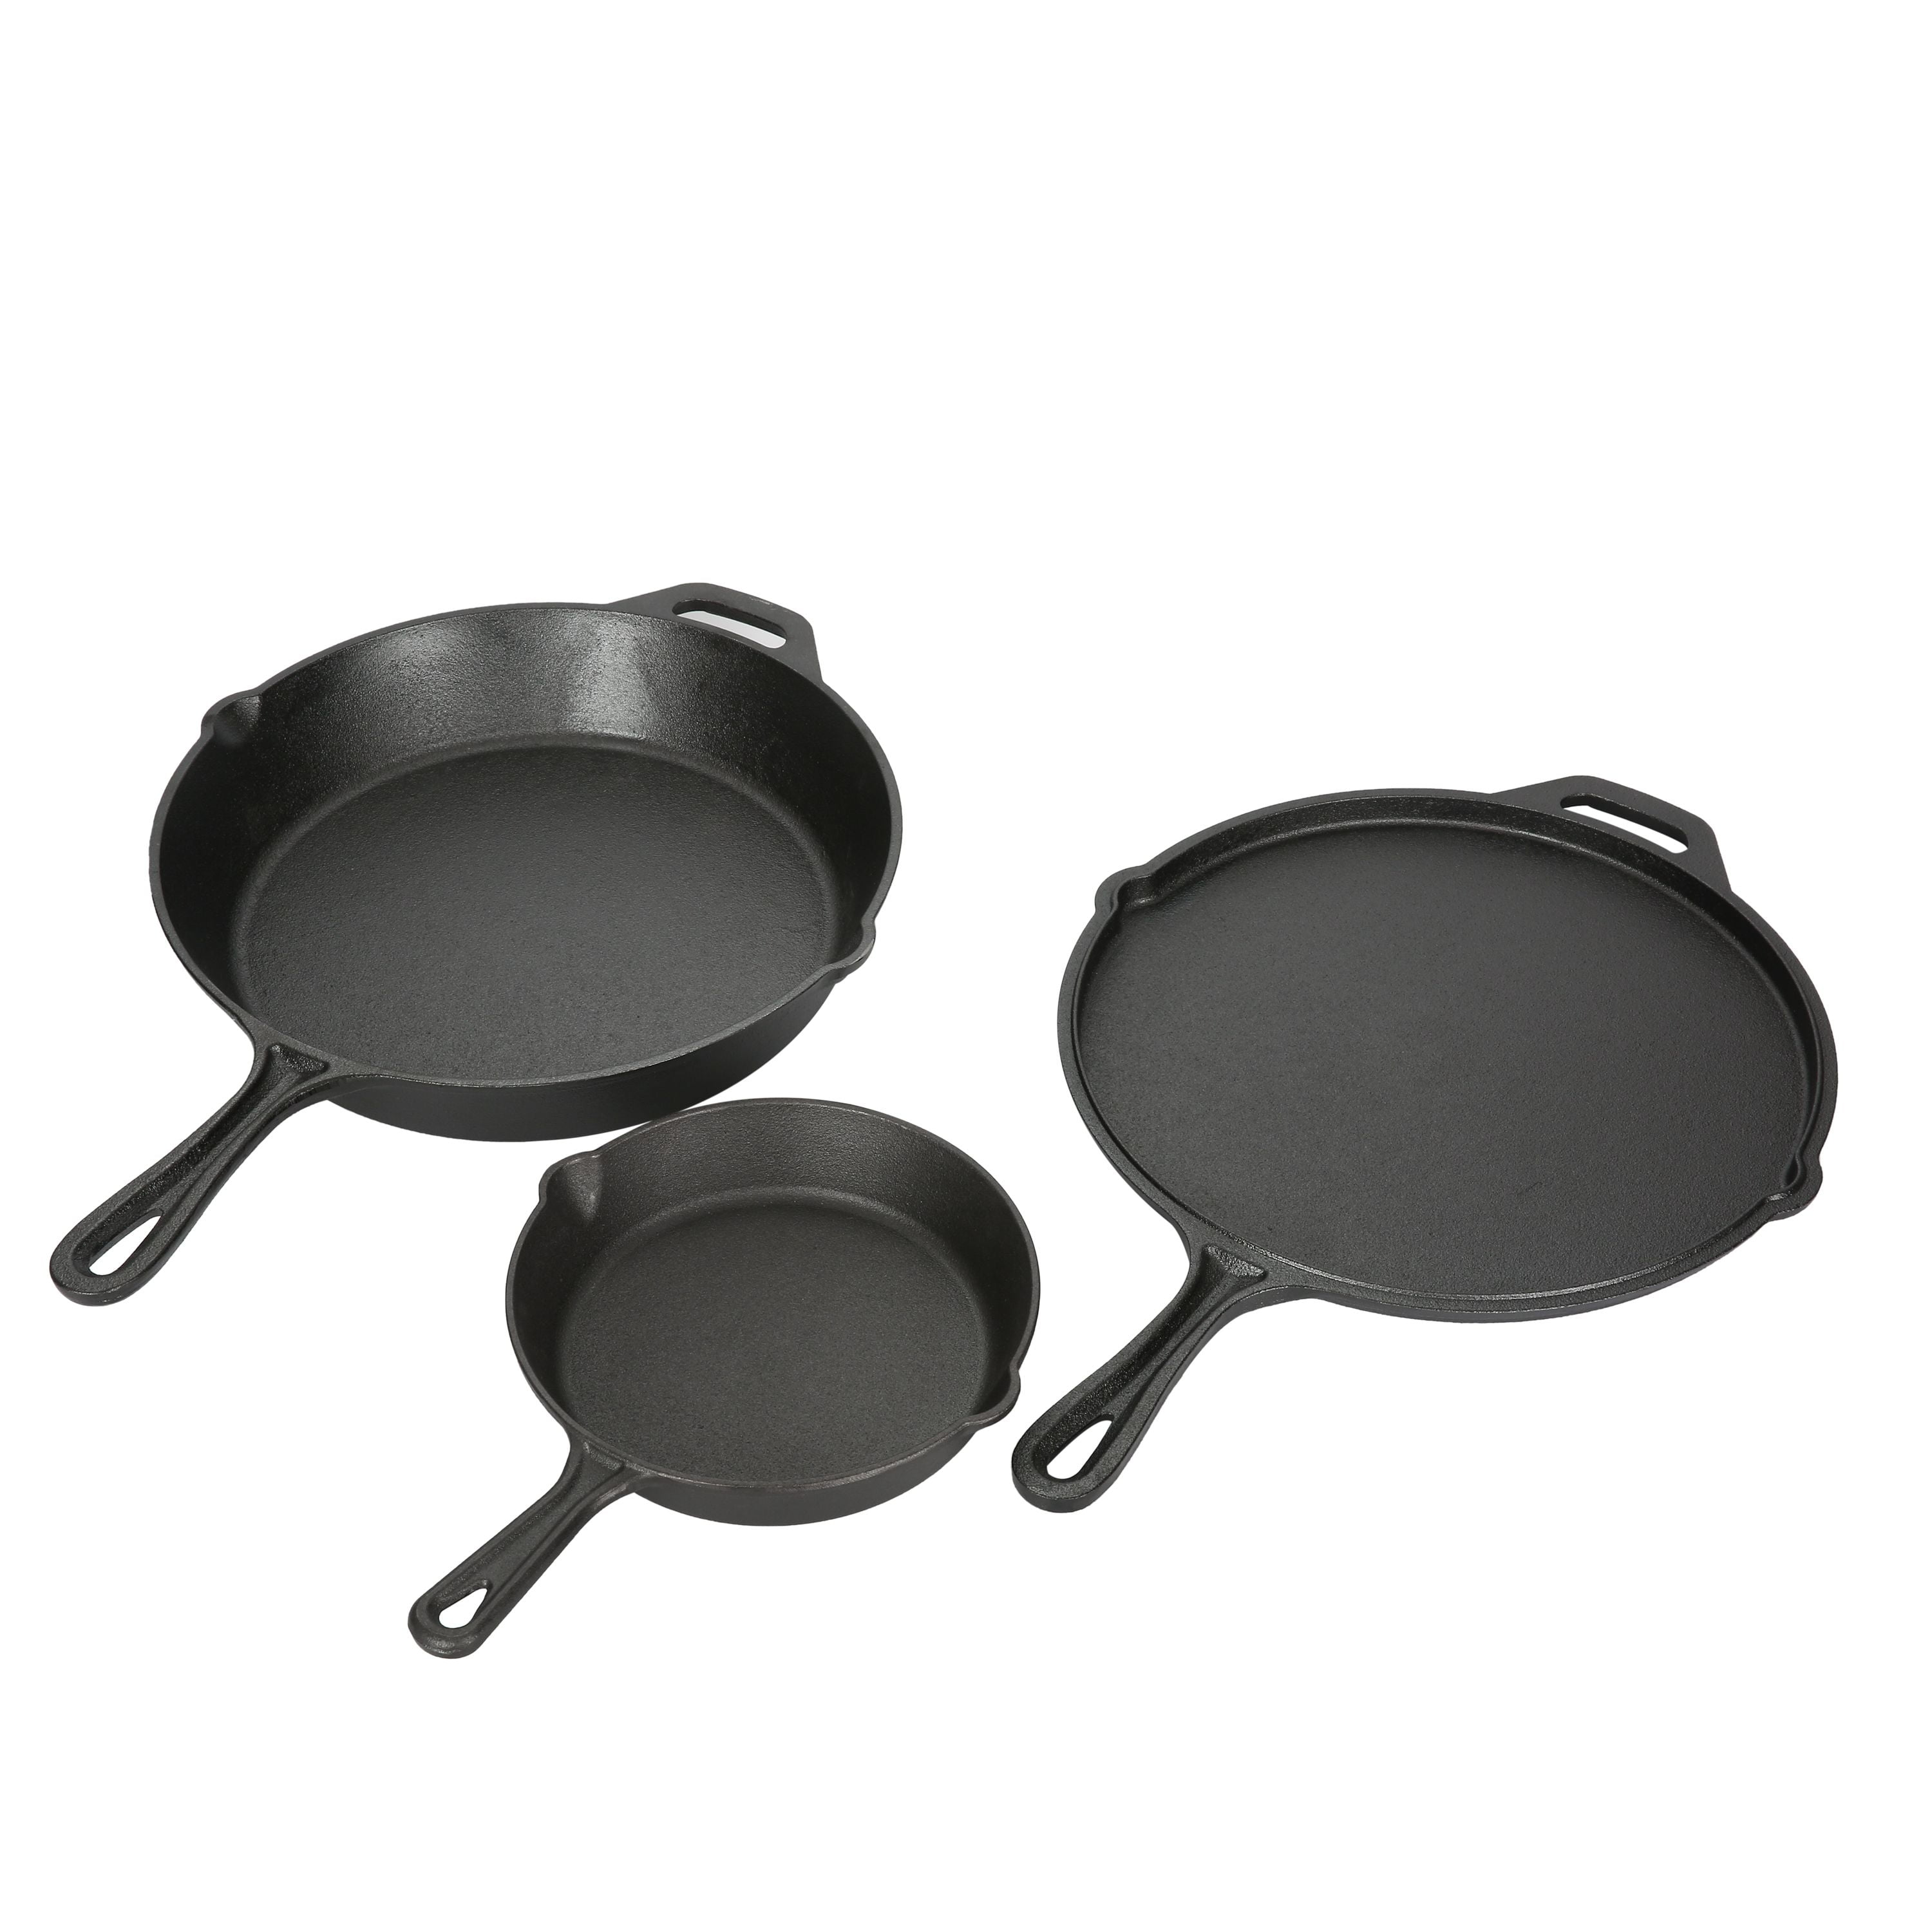 3 CAST IRON SKILLET Pre Seasoned 8 10.5 12 Inch Stove Oven Fry Pans Cookware Set 